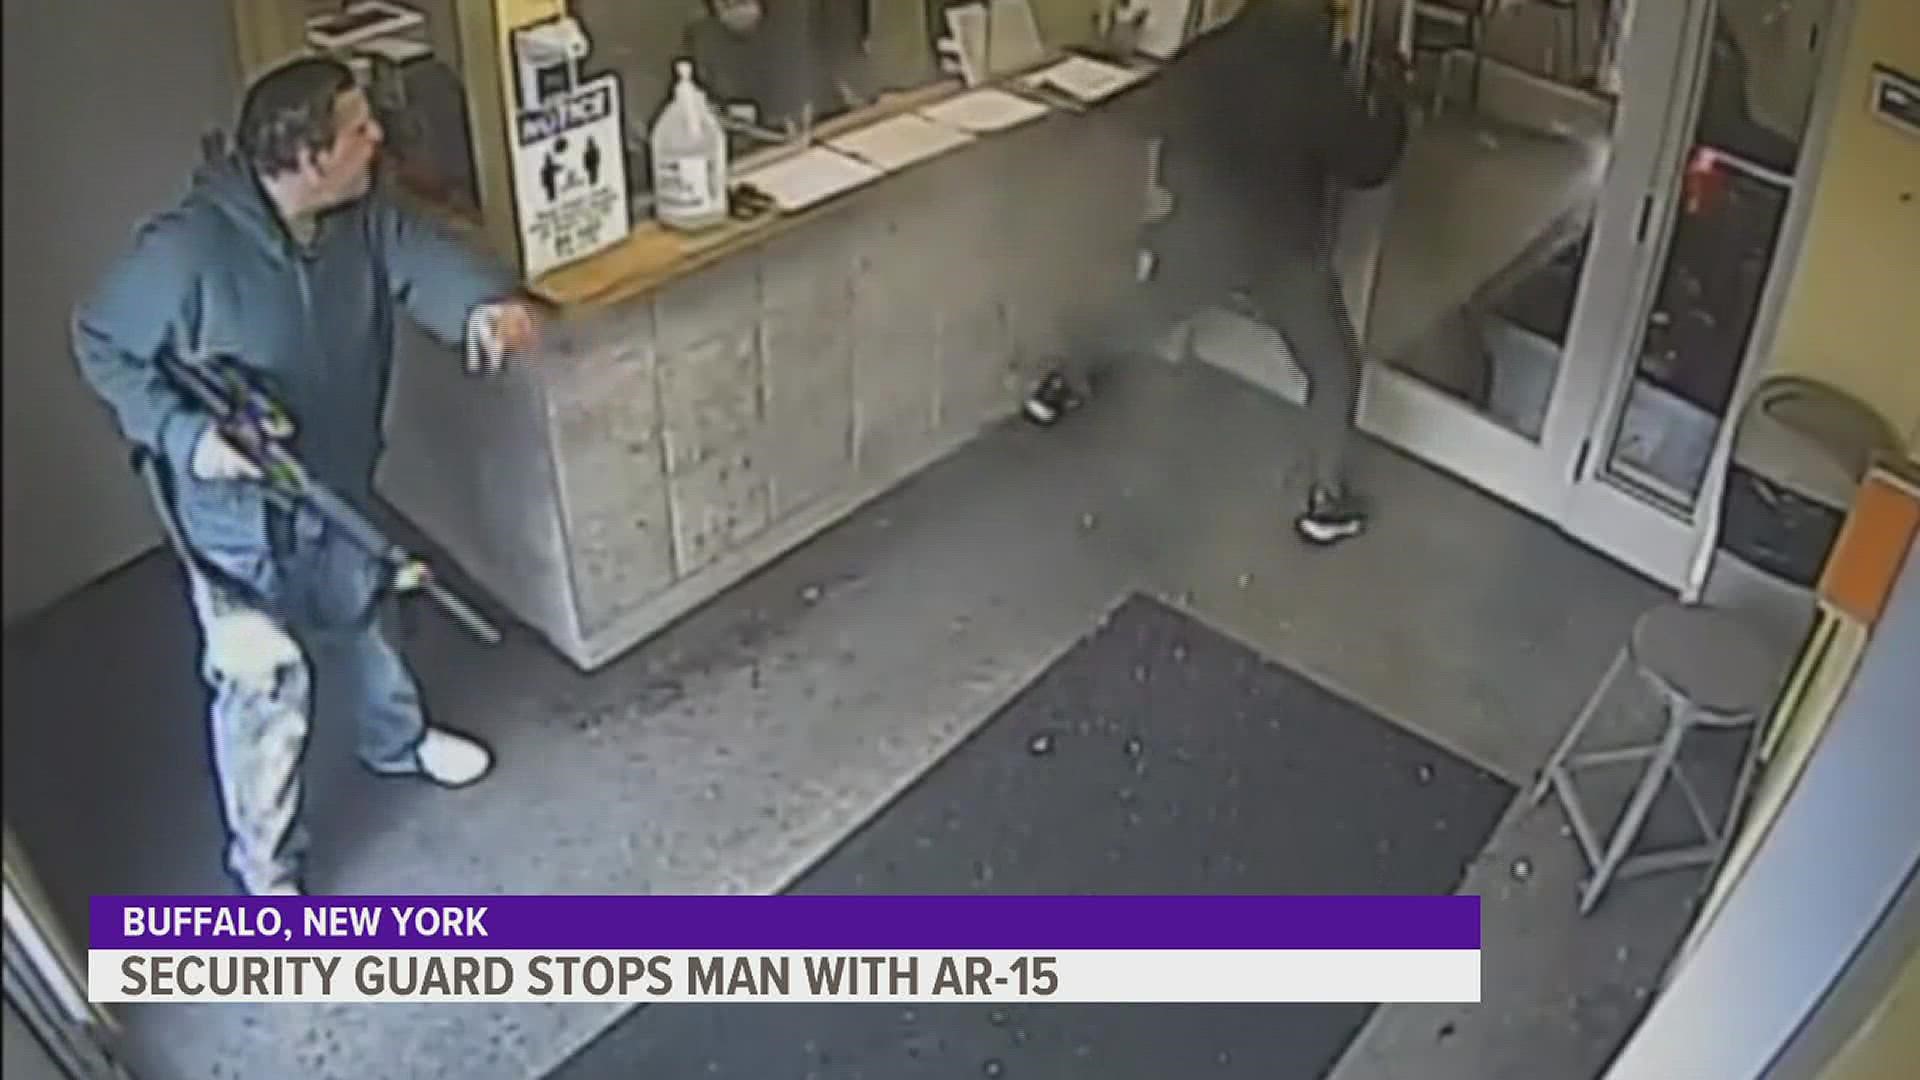 Buffalo Police released security video from Thursday morning, when a man walked into a clinic with an AR-15 and allegedly fired one shot into the wall.